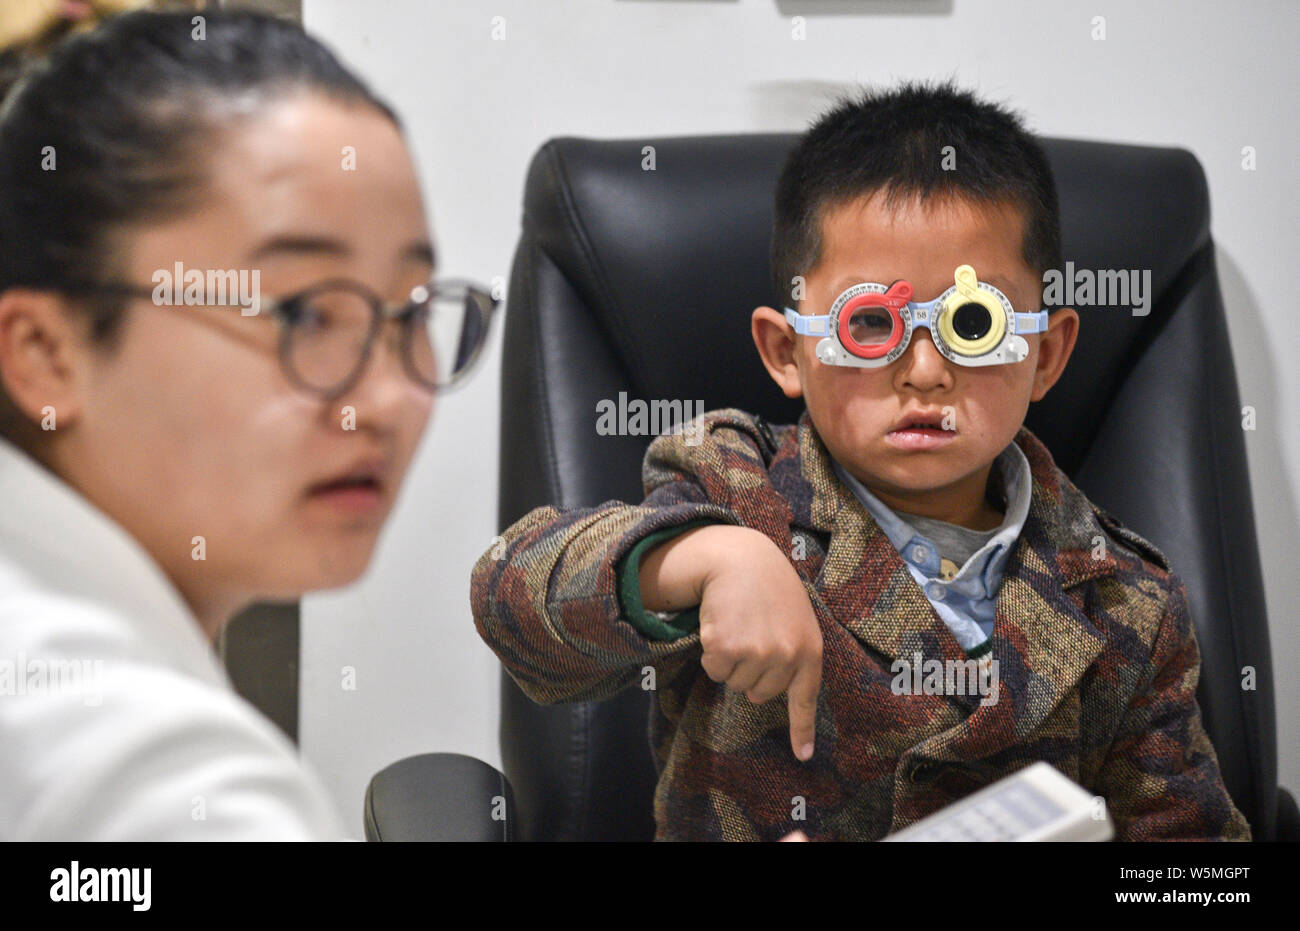 --FILE--A Chinese doctor tests the eyesight of a young boy at an eye hospital in Xi'an city, northwest China's Shaanxi province, 22 March 2019.   Acco Stock Photo